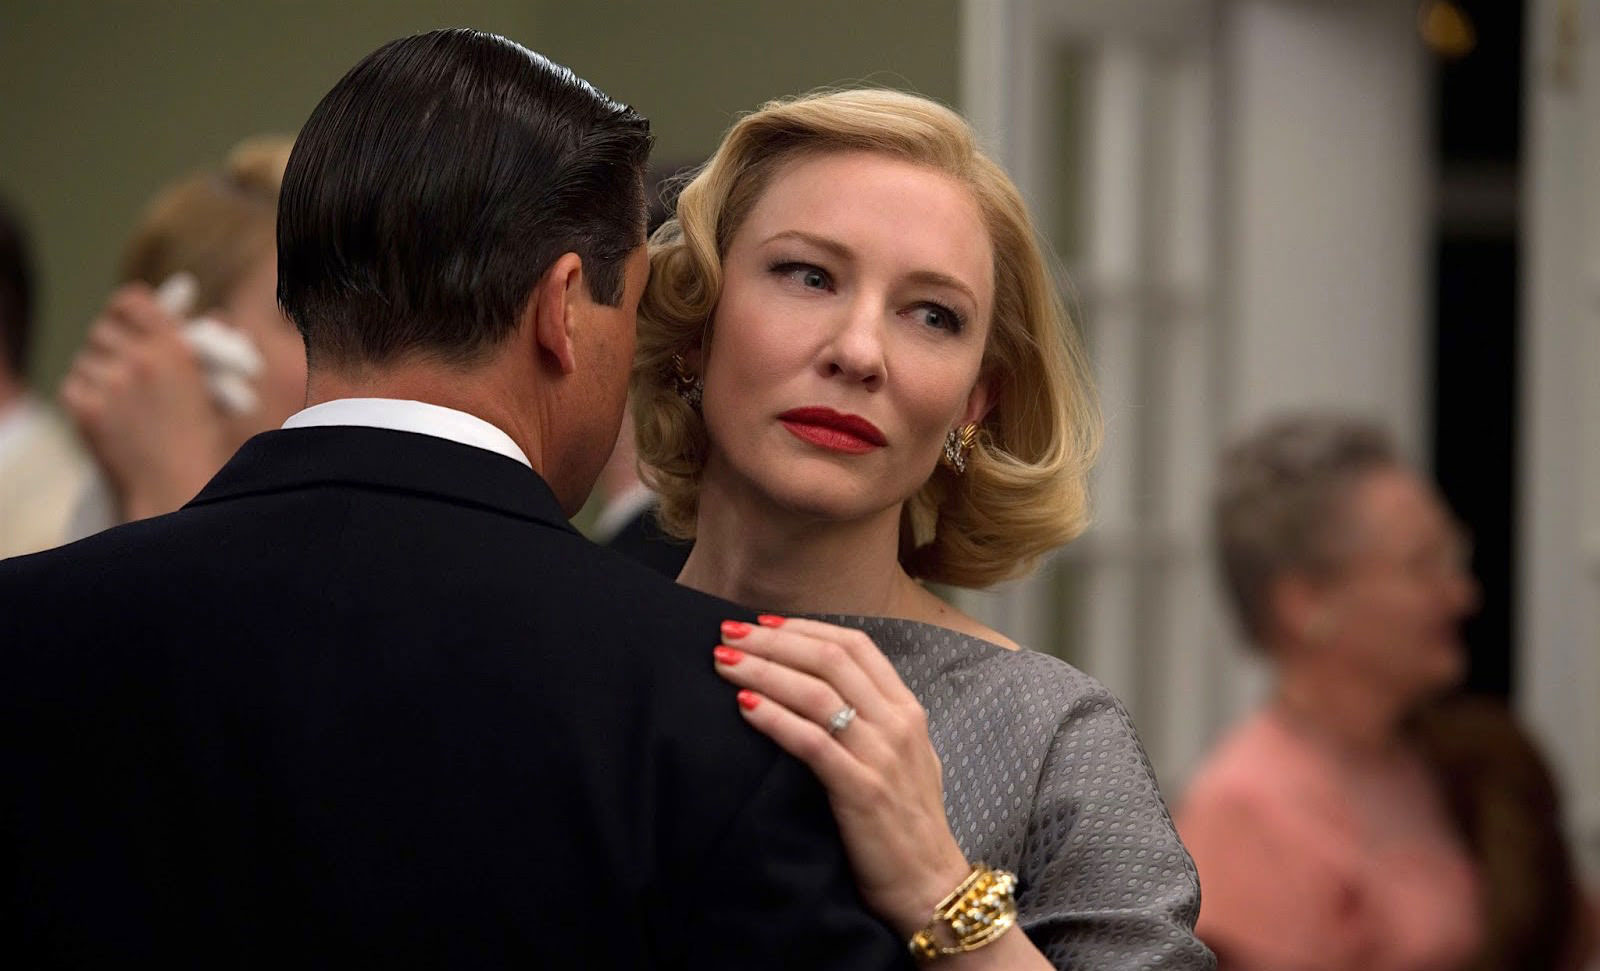 Cate Blanchett as Carol and Kyle Chandler as her husband Harge Aird in Carol, 2015